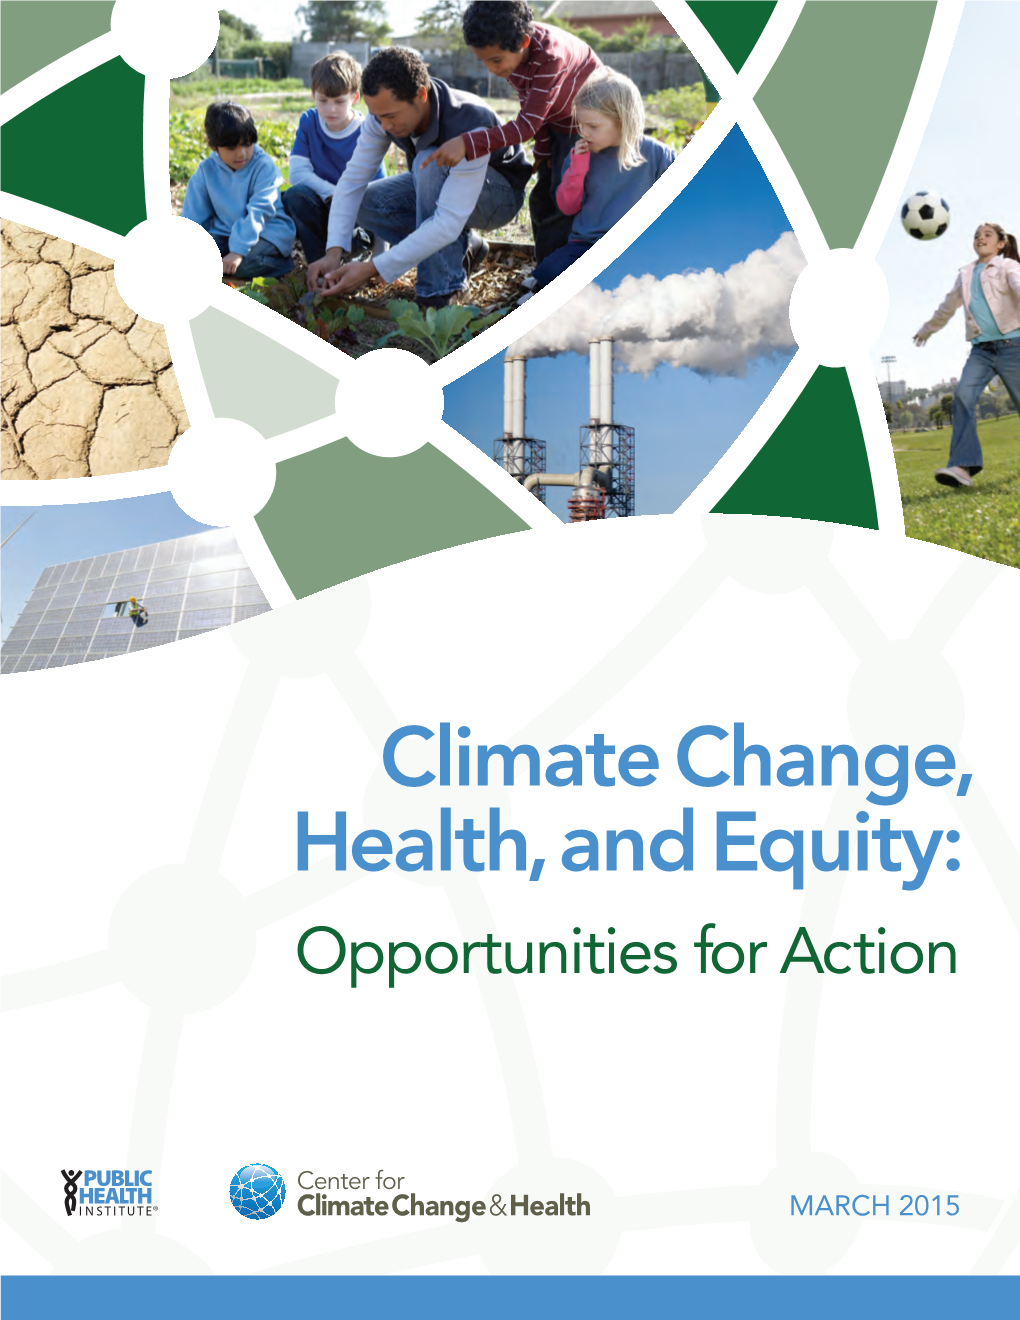 Climate Change, Health, and Equity: Opportunities for Action